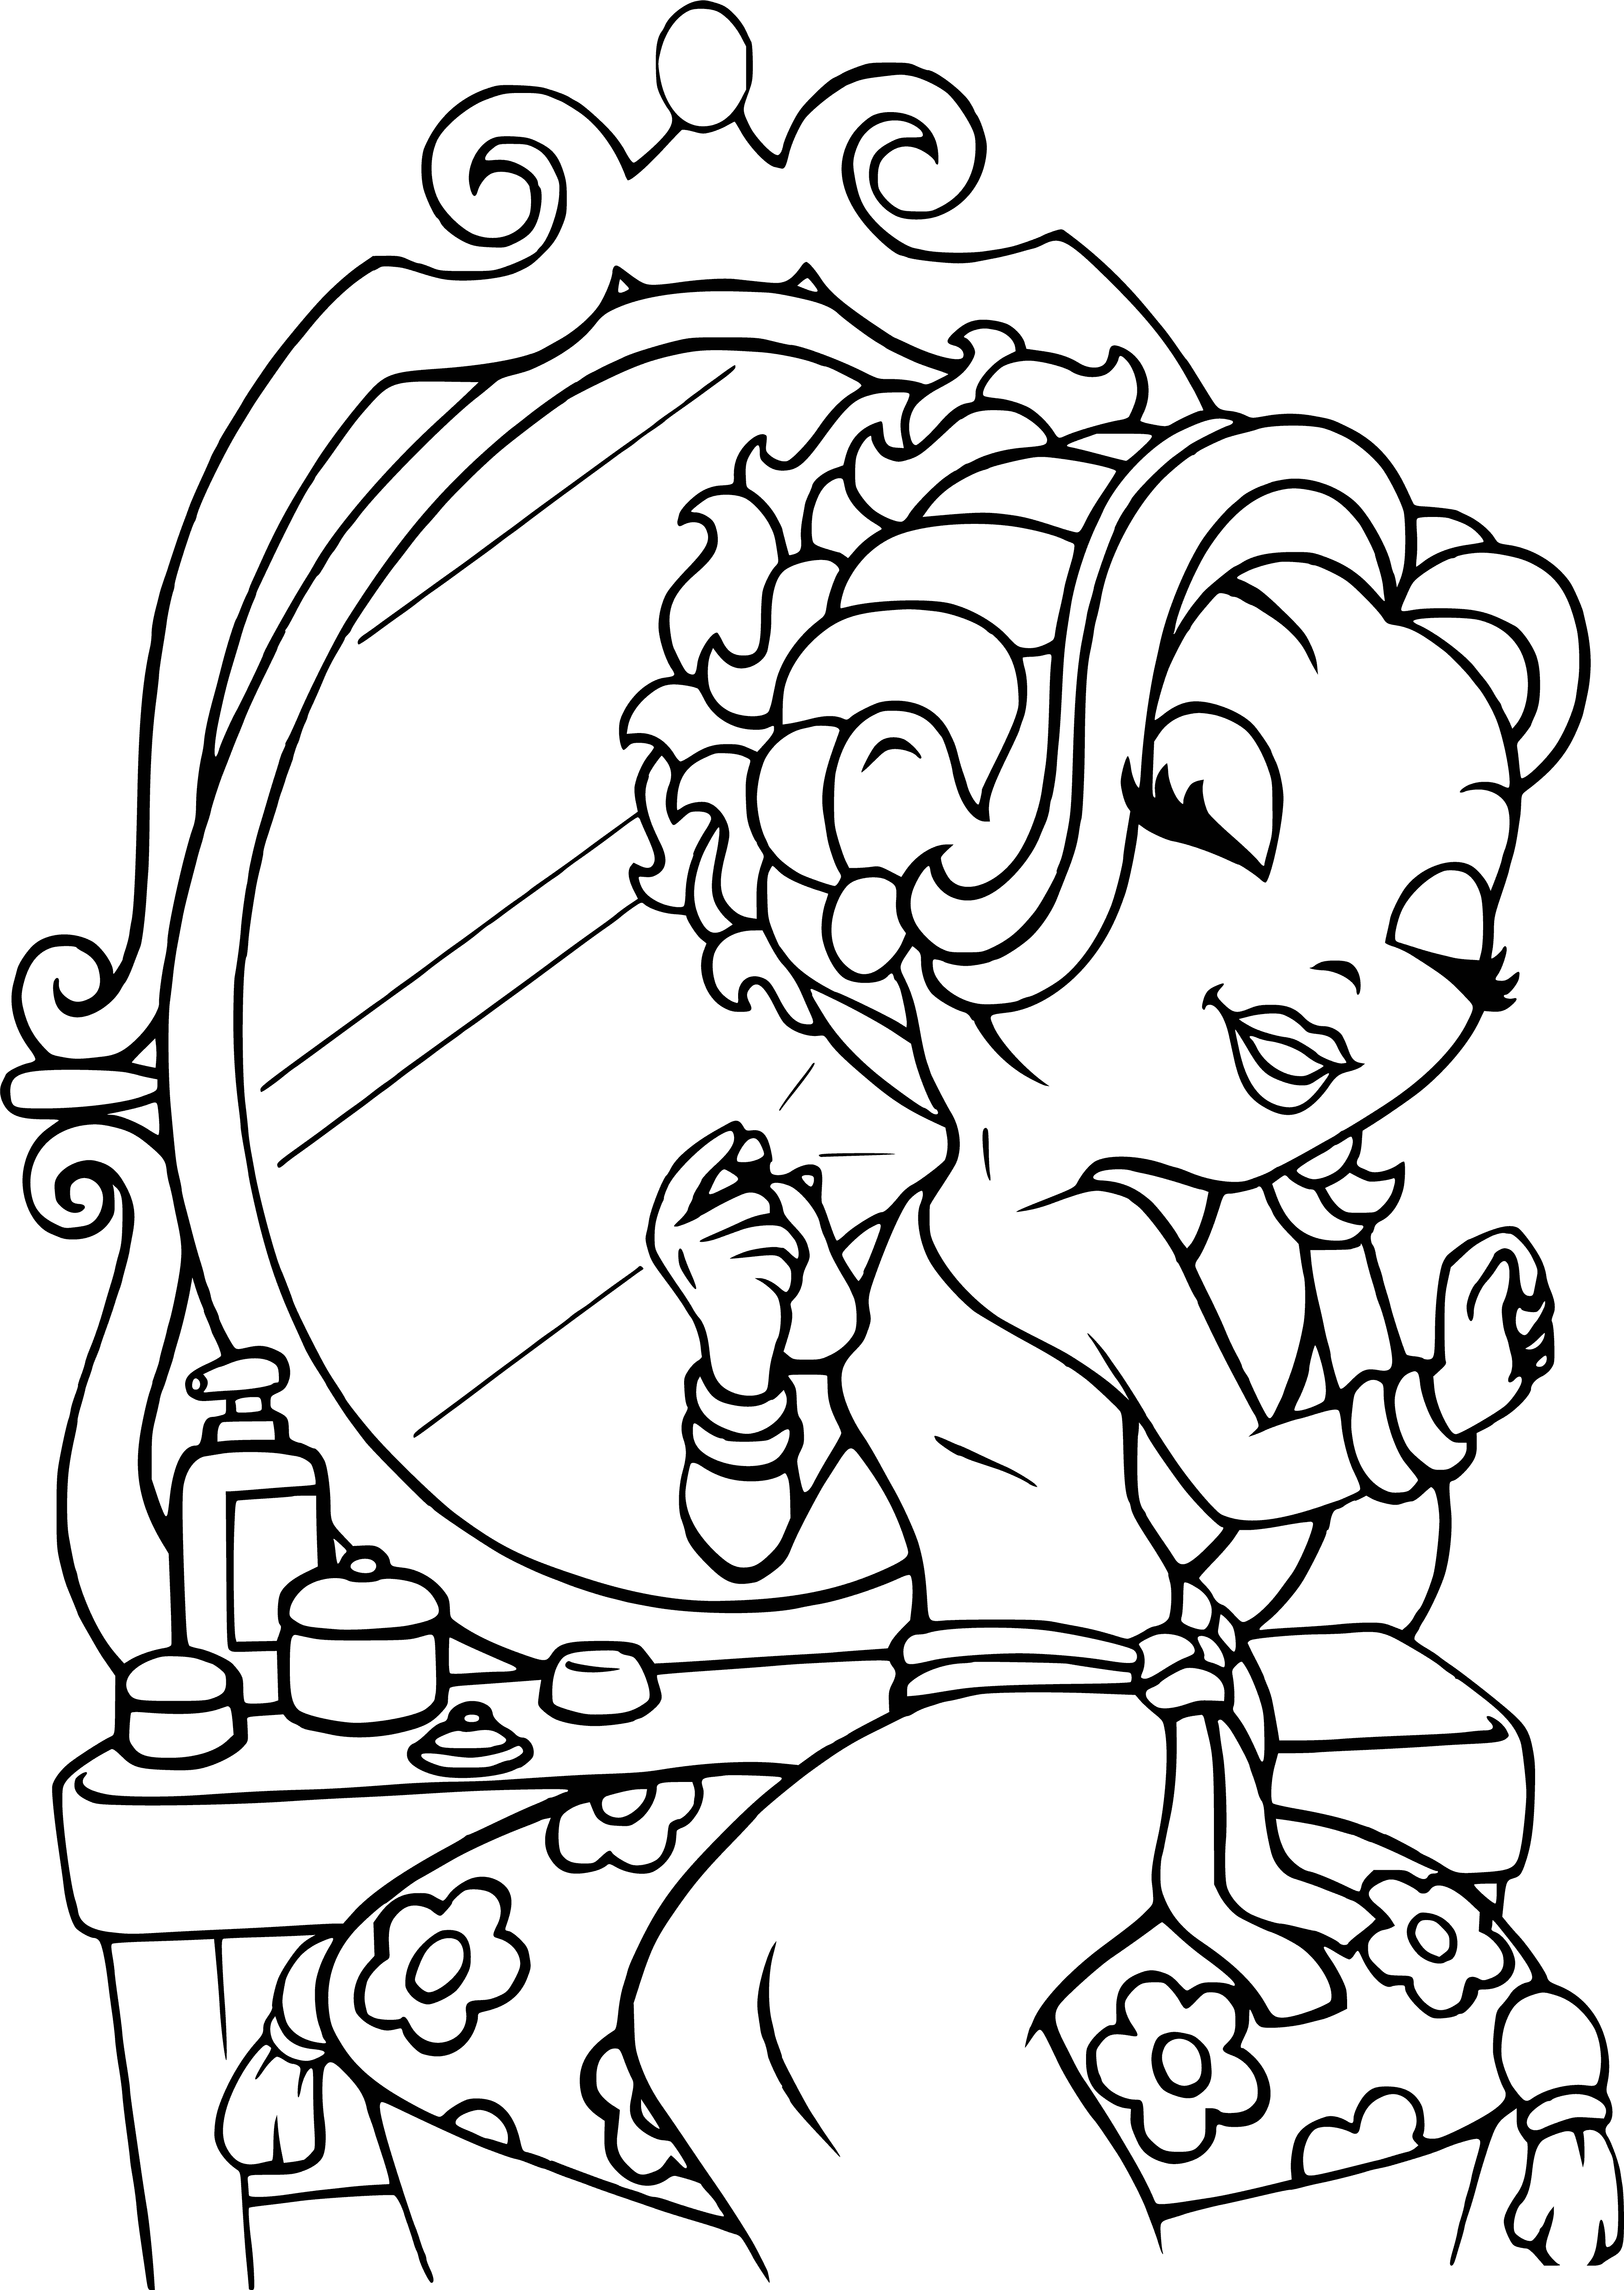 coloring page: Glam girl stands ready for a magical night out, wearing a pink dress and holding a pink wand with a star. #MagicNightOut